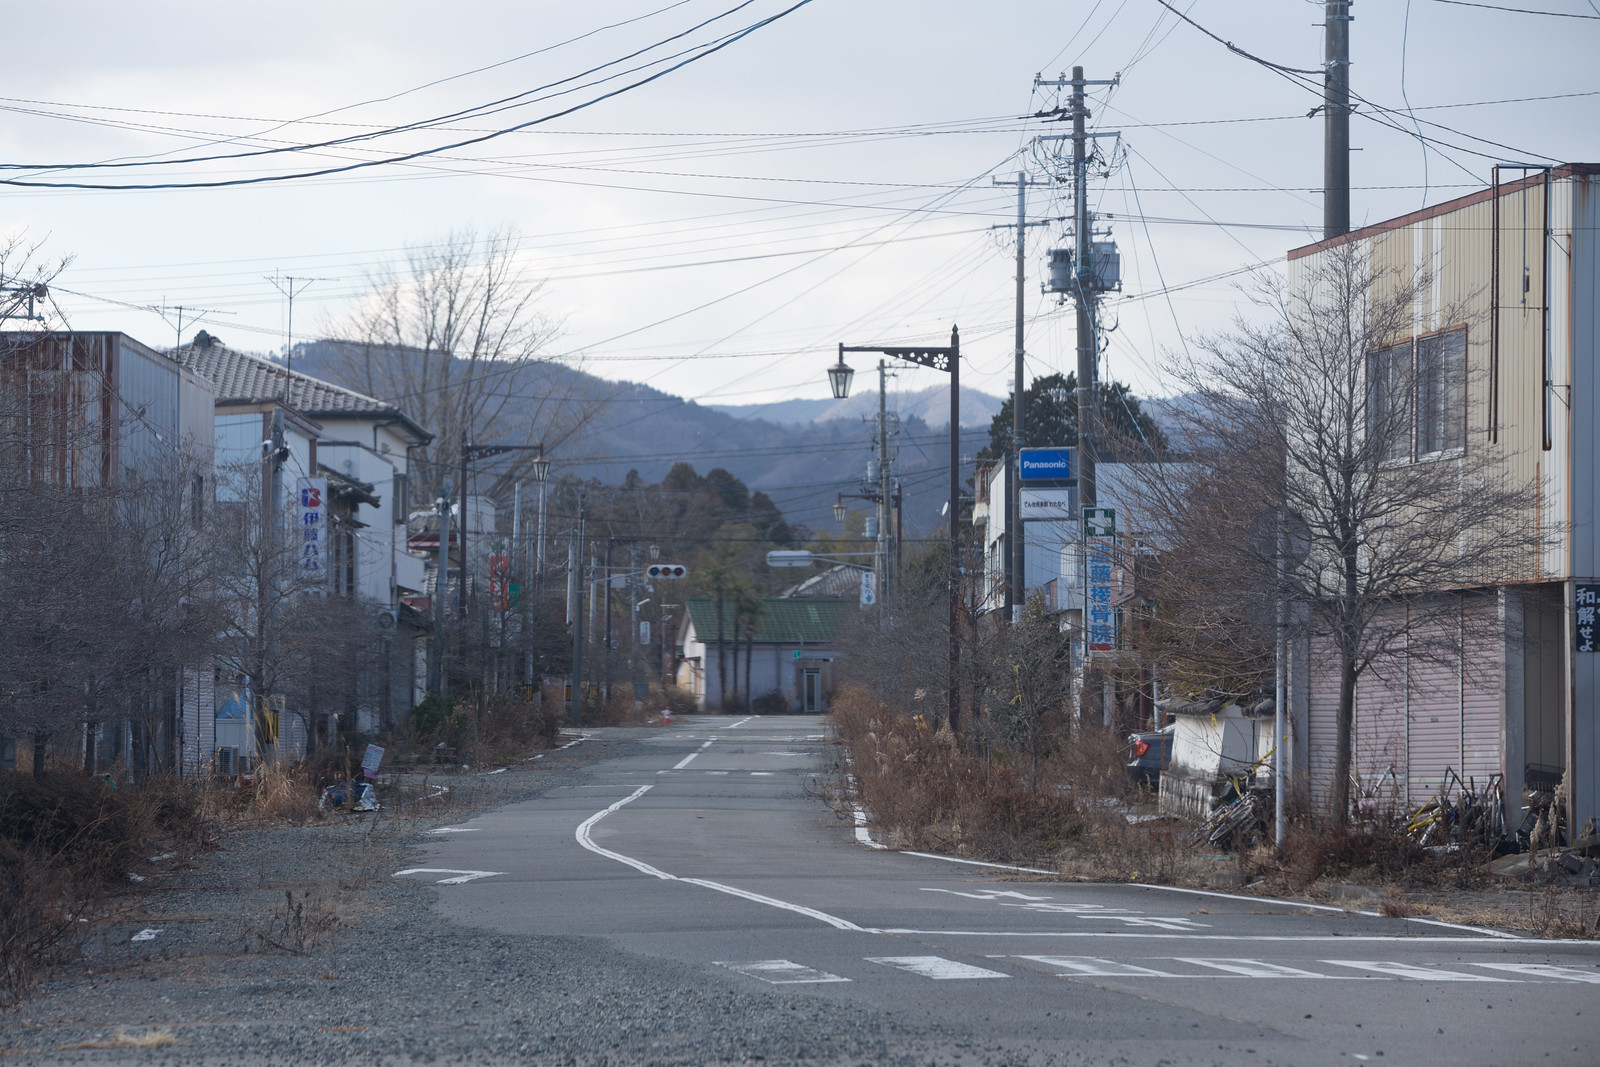 Street in the Heightened Nuclear Exclusion Zone